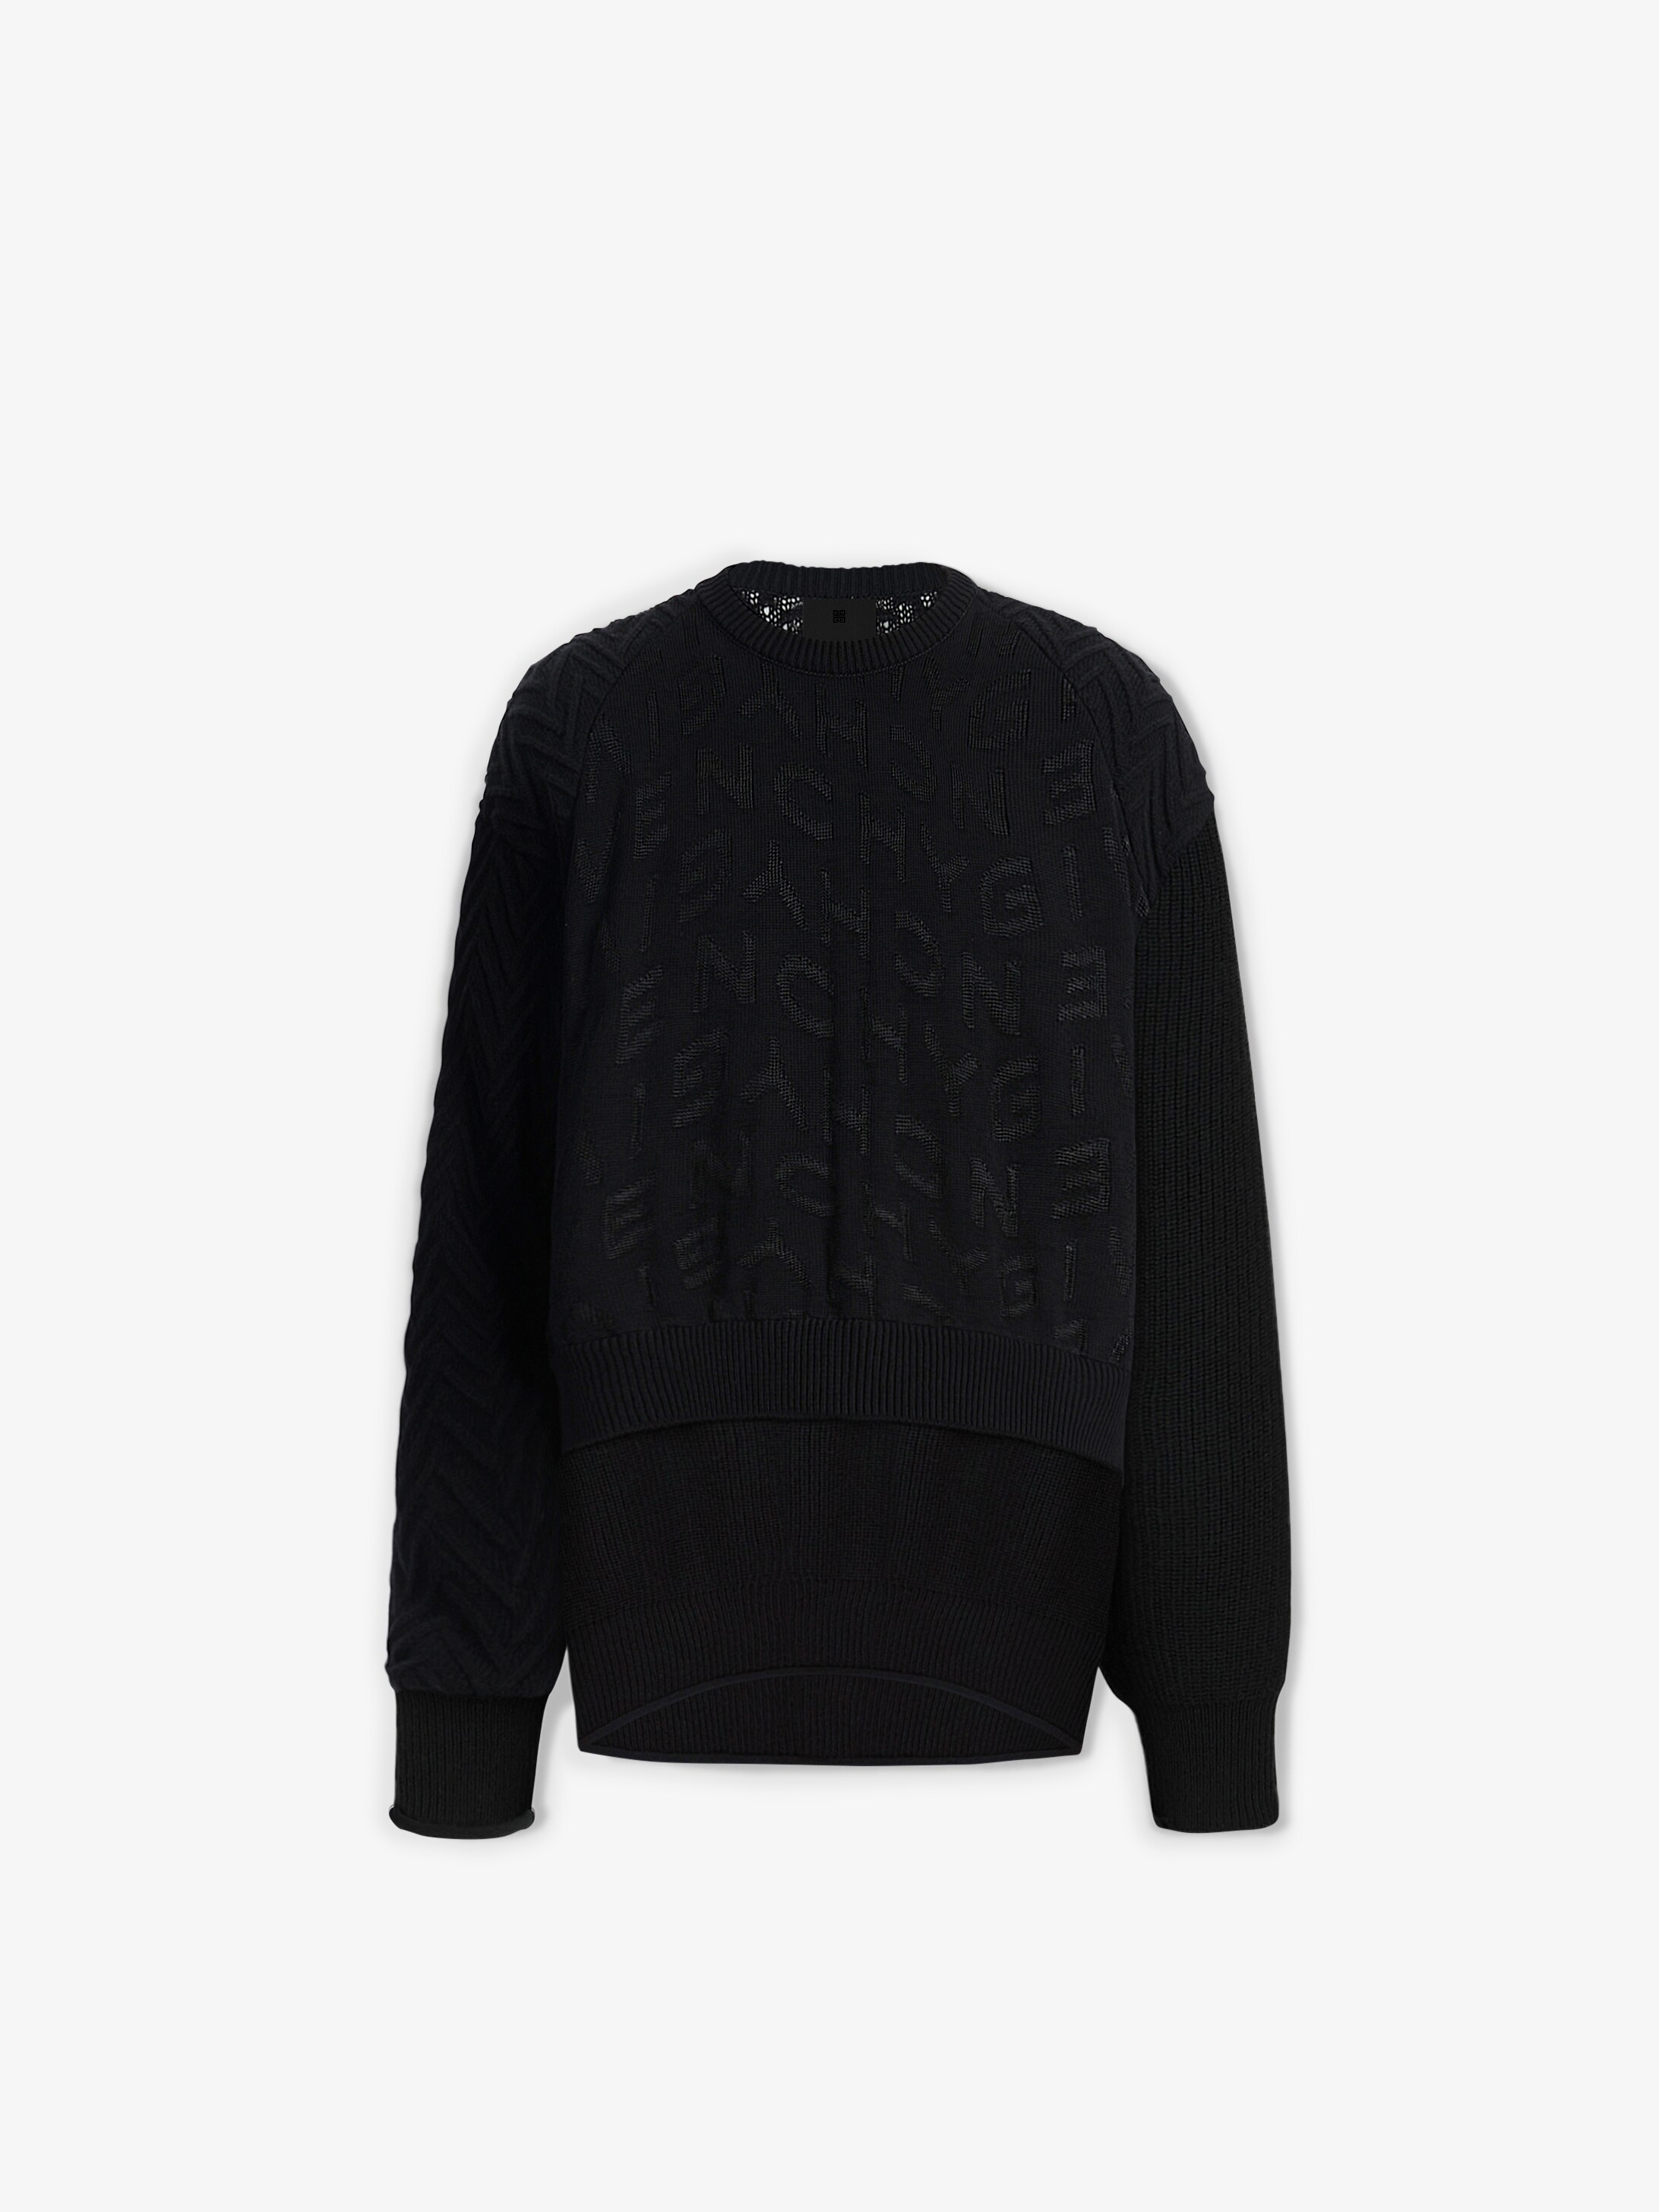 GIVENCHY refracted sweater with layered effect | GIVENCHY Paris